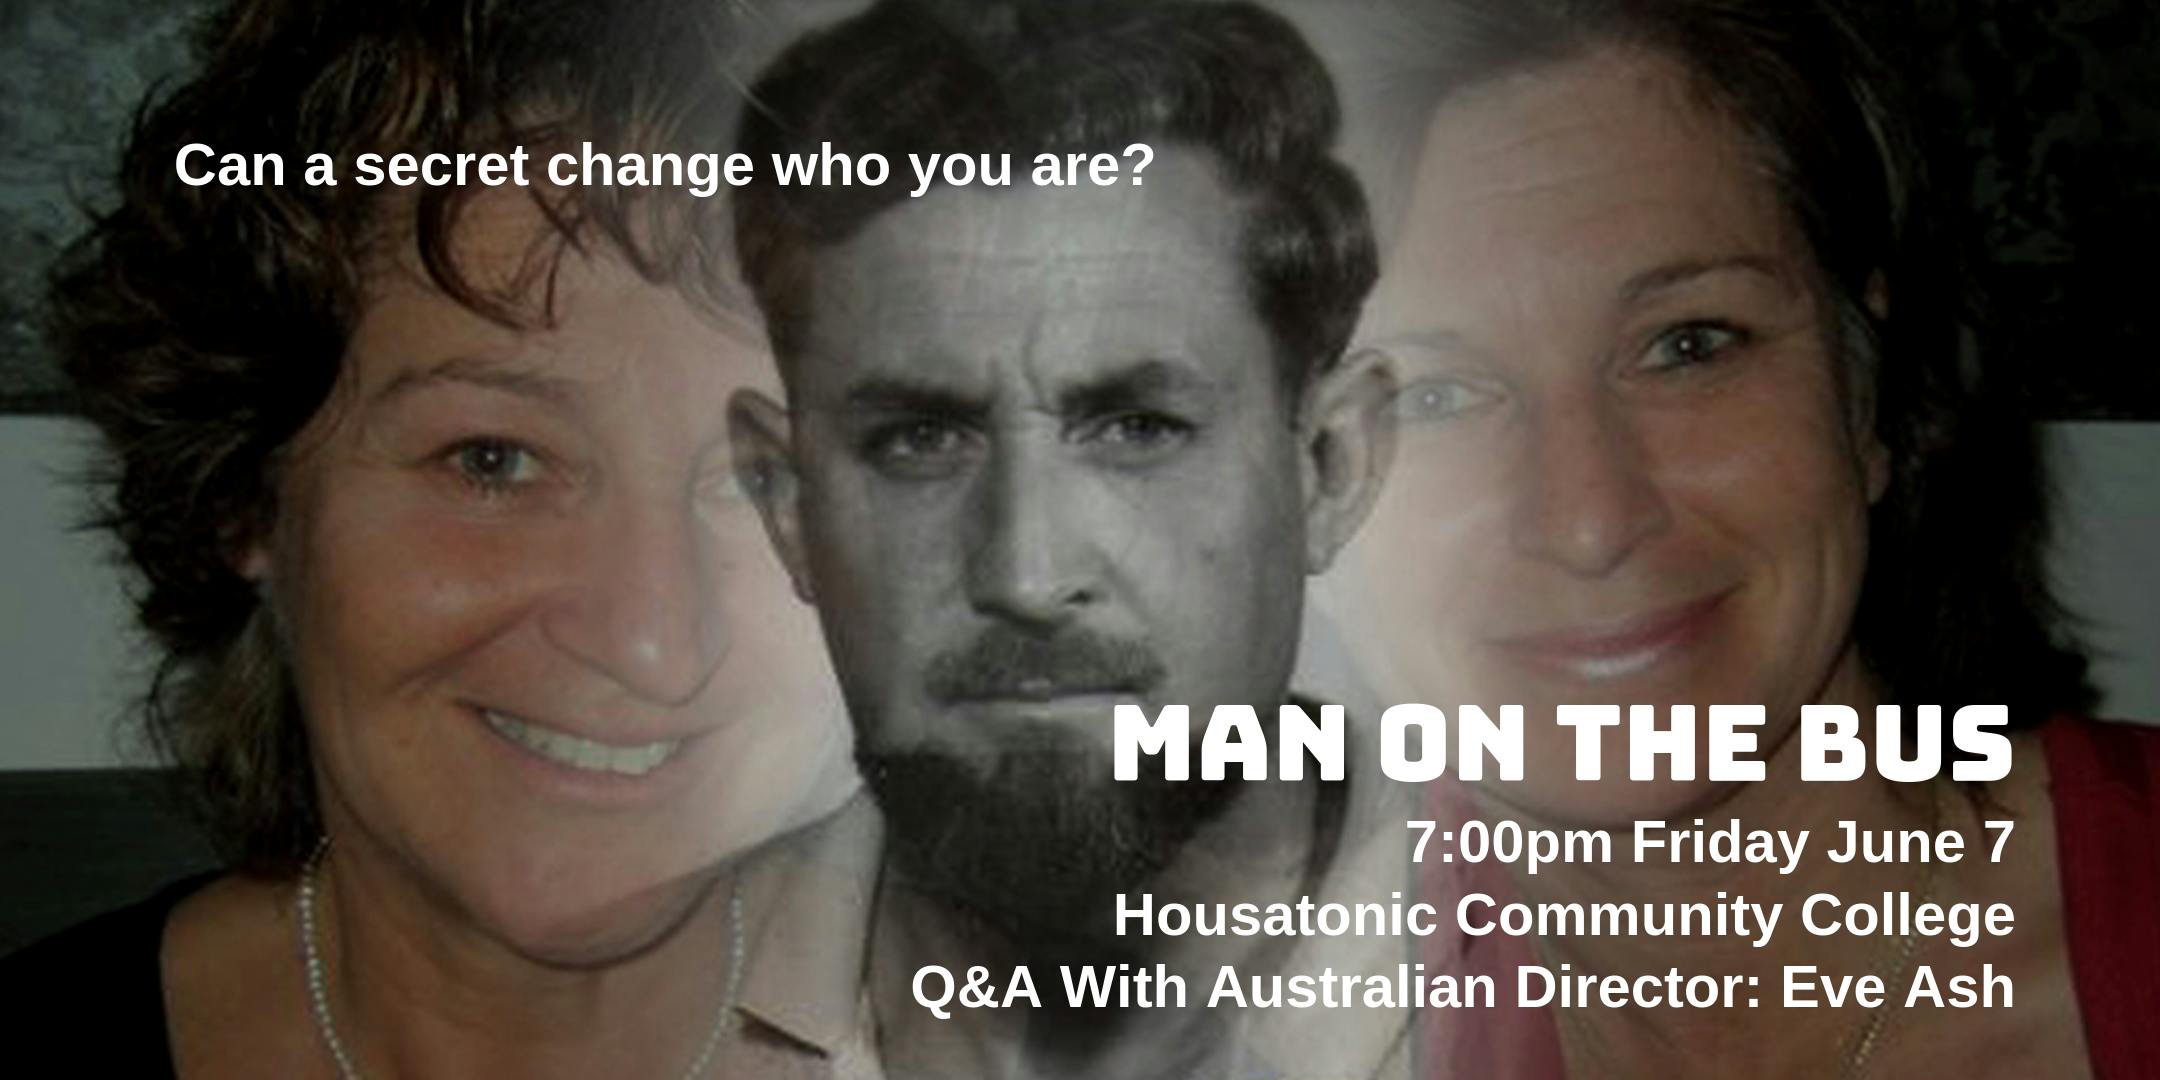 The Man On The Bus FREE Film And Q&A With Australian Director: Eve Ash. Can The Secret Of A Holocaust Survivor Parent Change Who You Are?